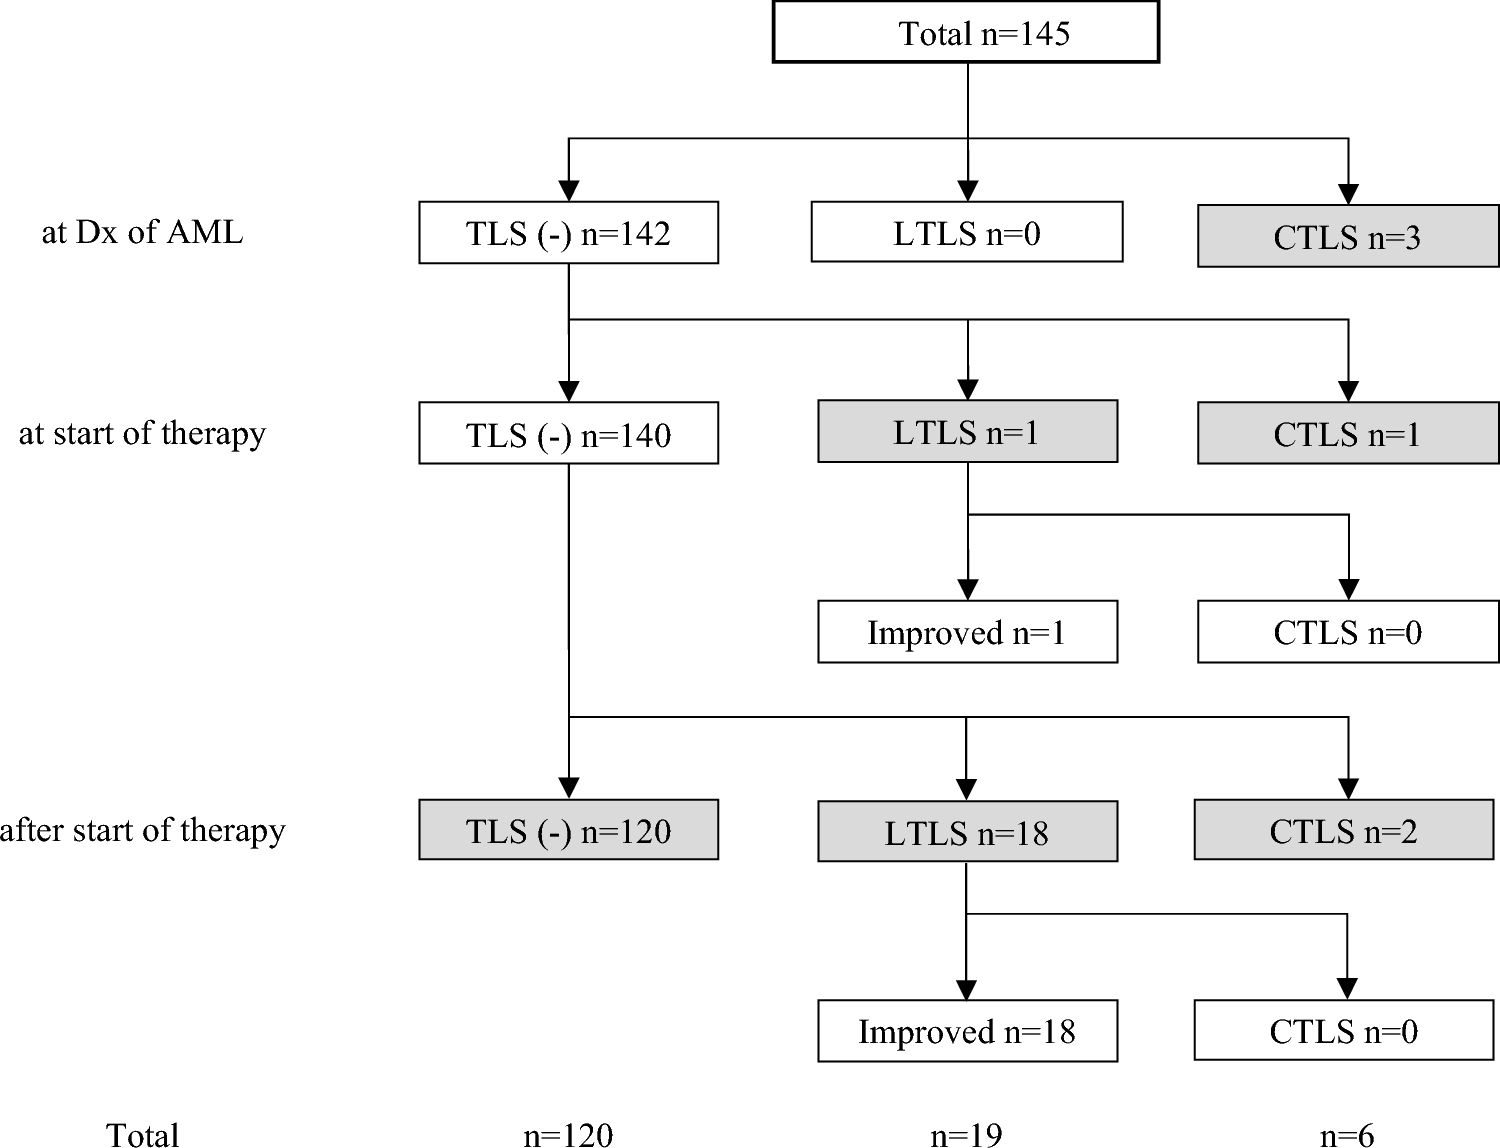 Tumor lysis syndrome in induction therapy for acute myeloid leukemia before the rasburicase era